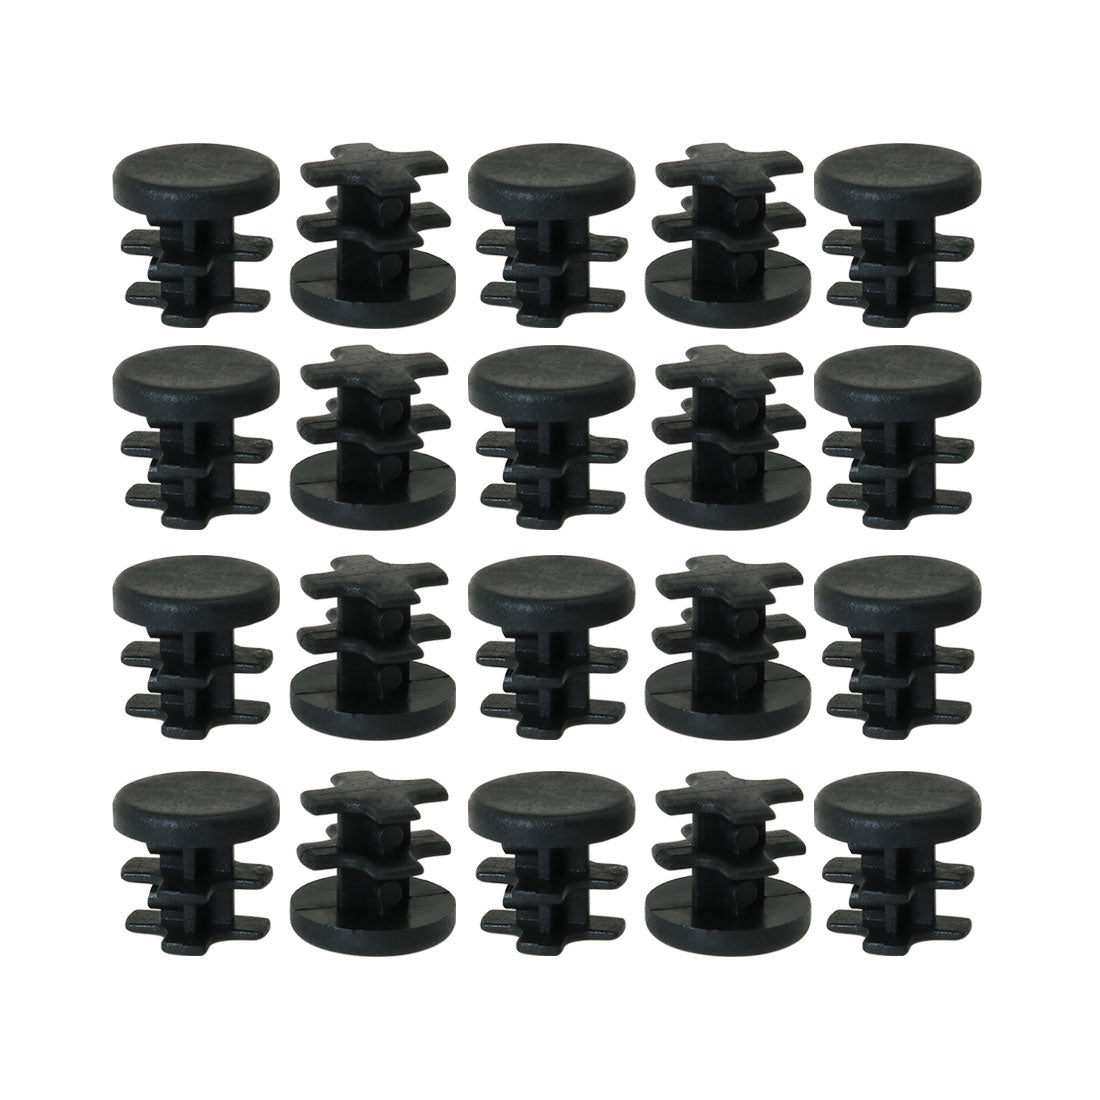 uxcell Uxcell 13mm 0.51" OD Plastic Tube Inserts Pipe Caps 20pcs, 0.4"-0.47" Inner Dia, Non-slip for Furniture Chairs Tables Desks